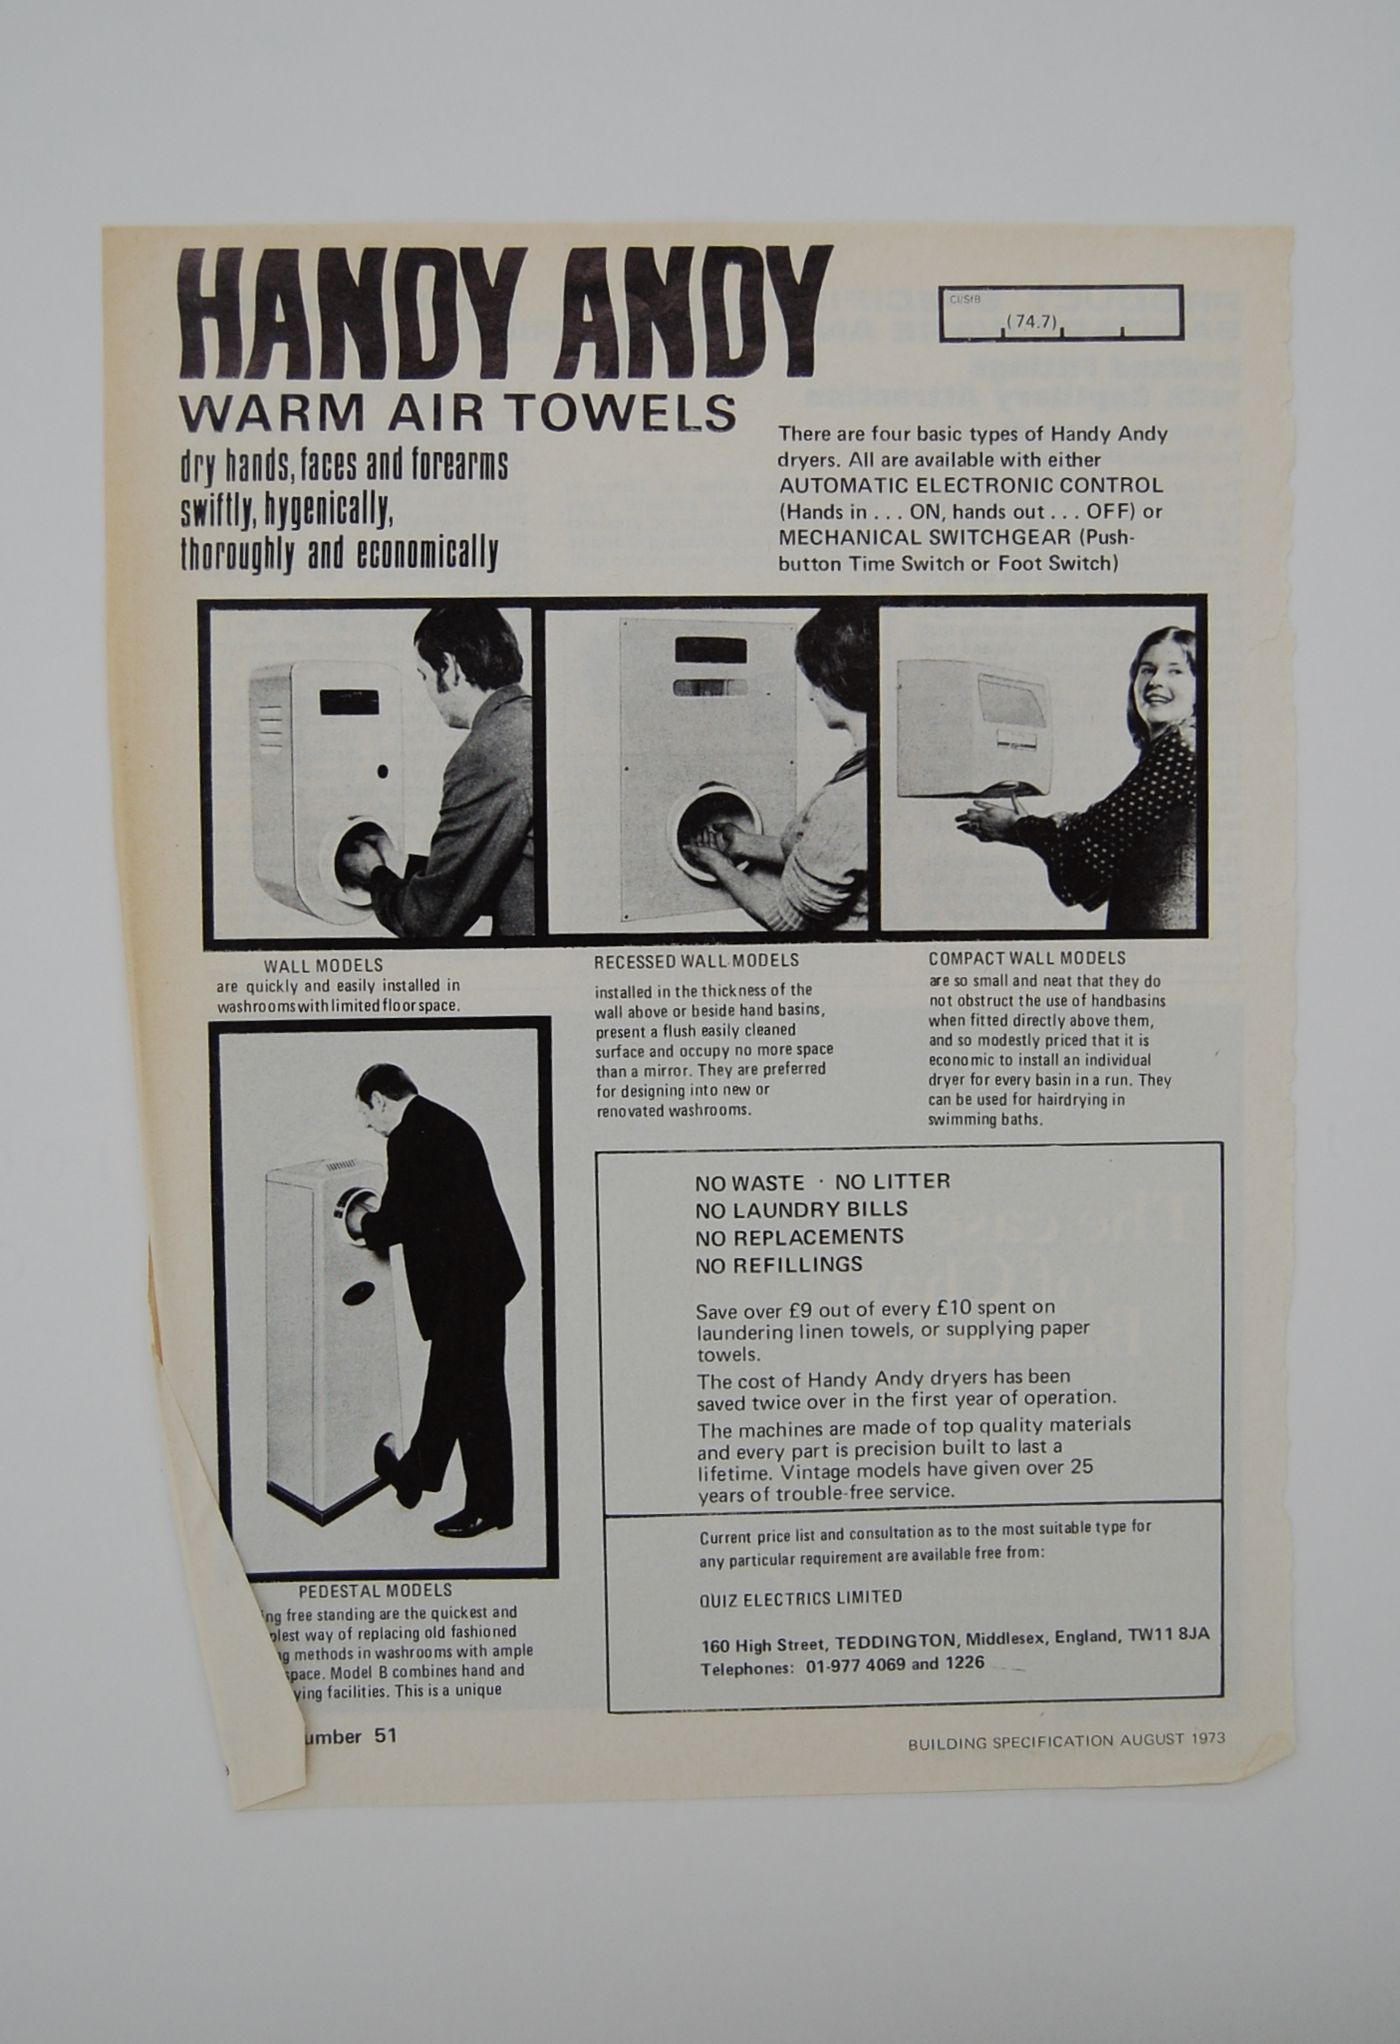 Handy Andy warm air towels : dry hands, faces and forearms swiftly, hygienically, thoroughly and economically